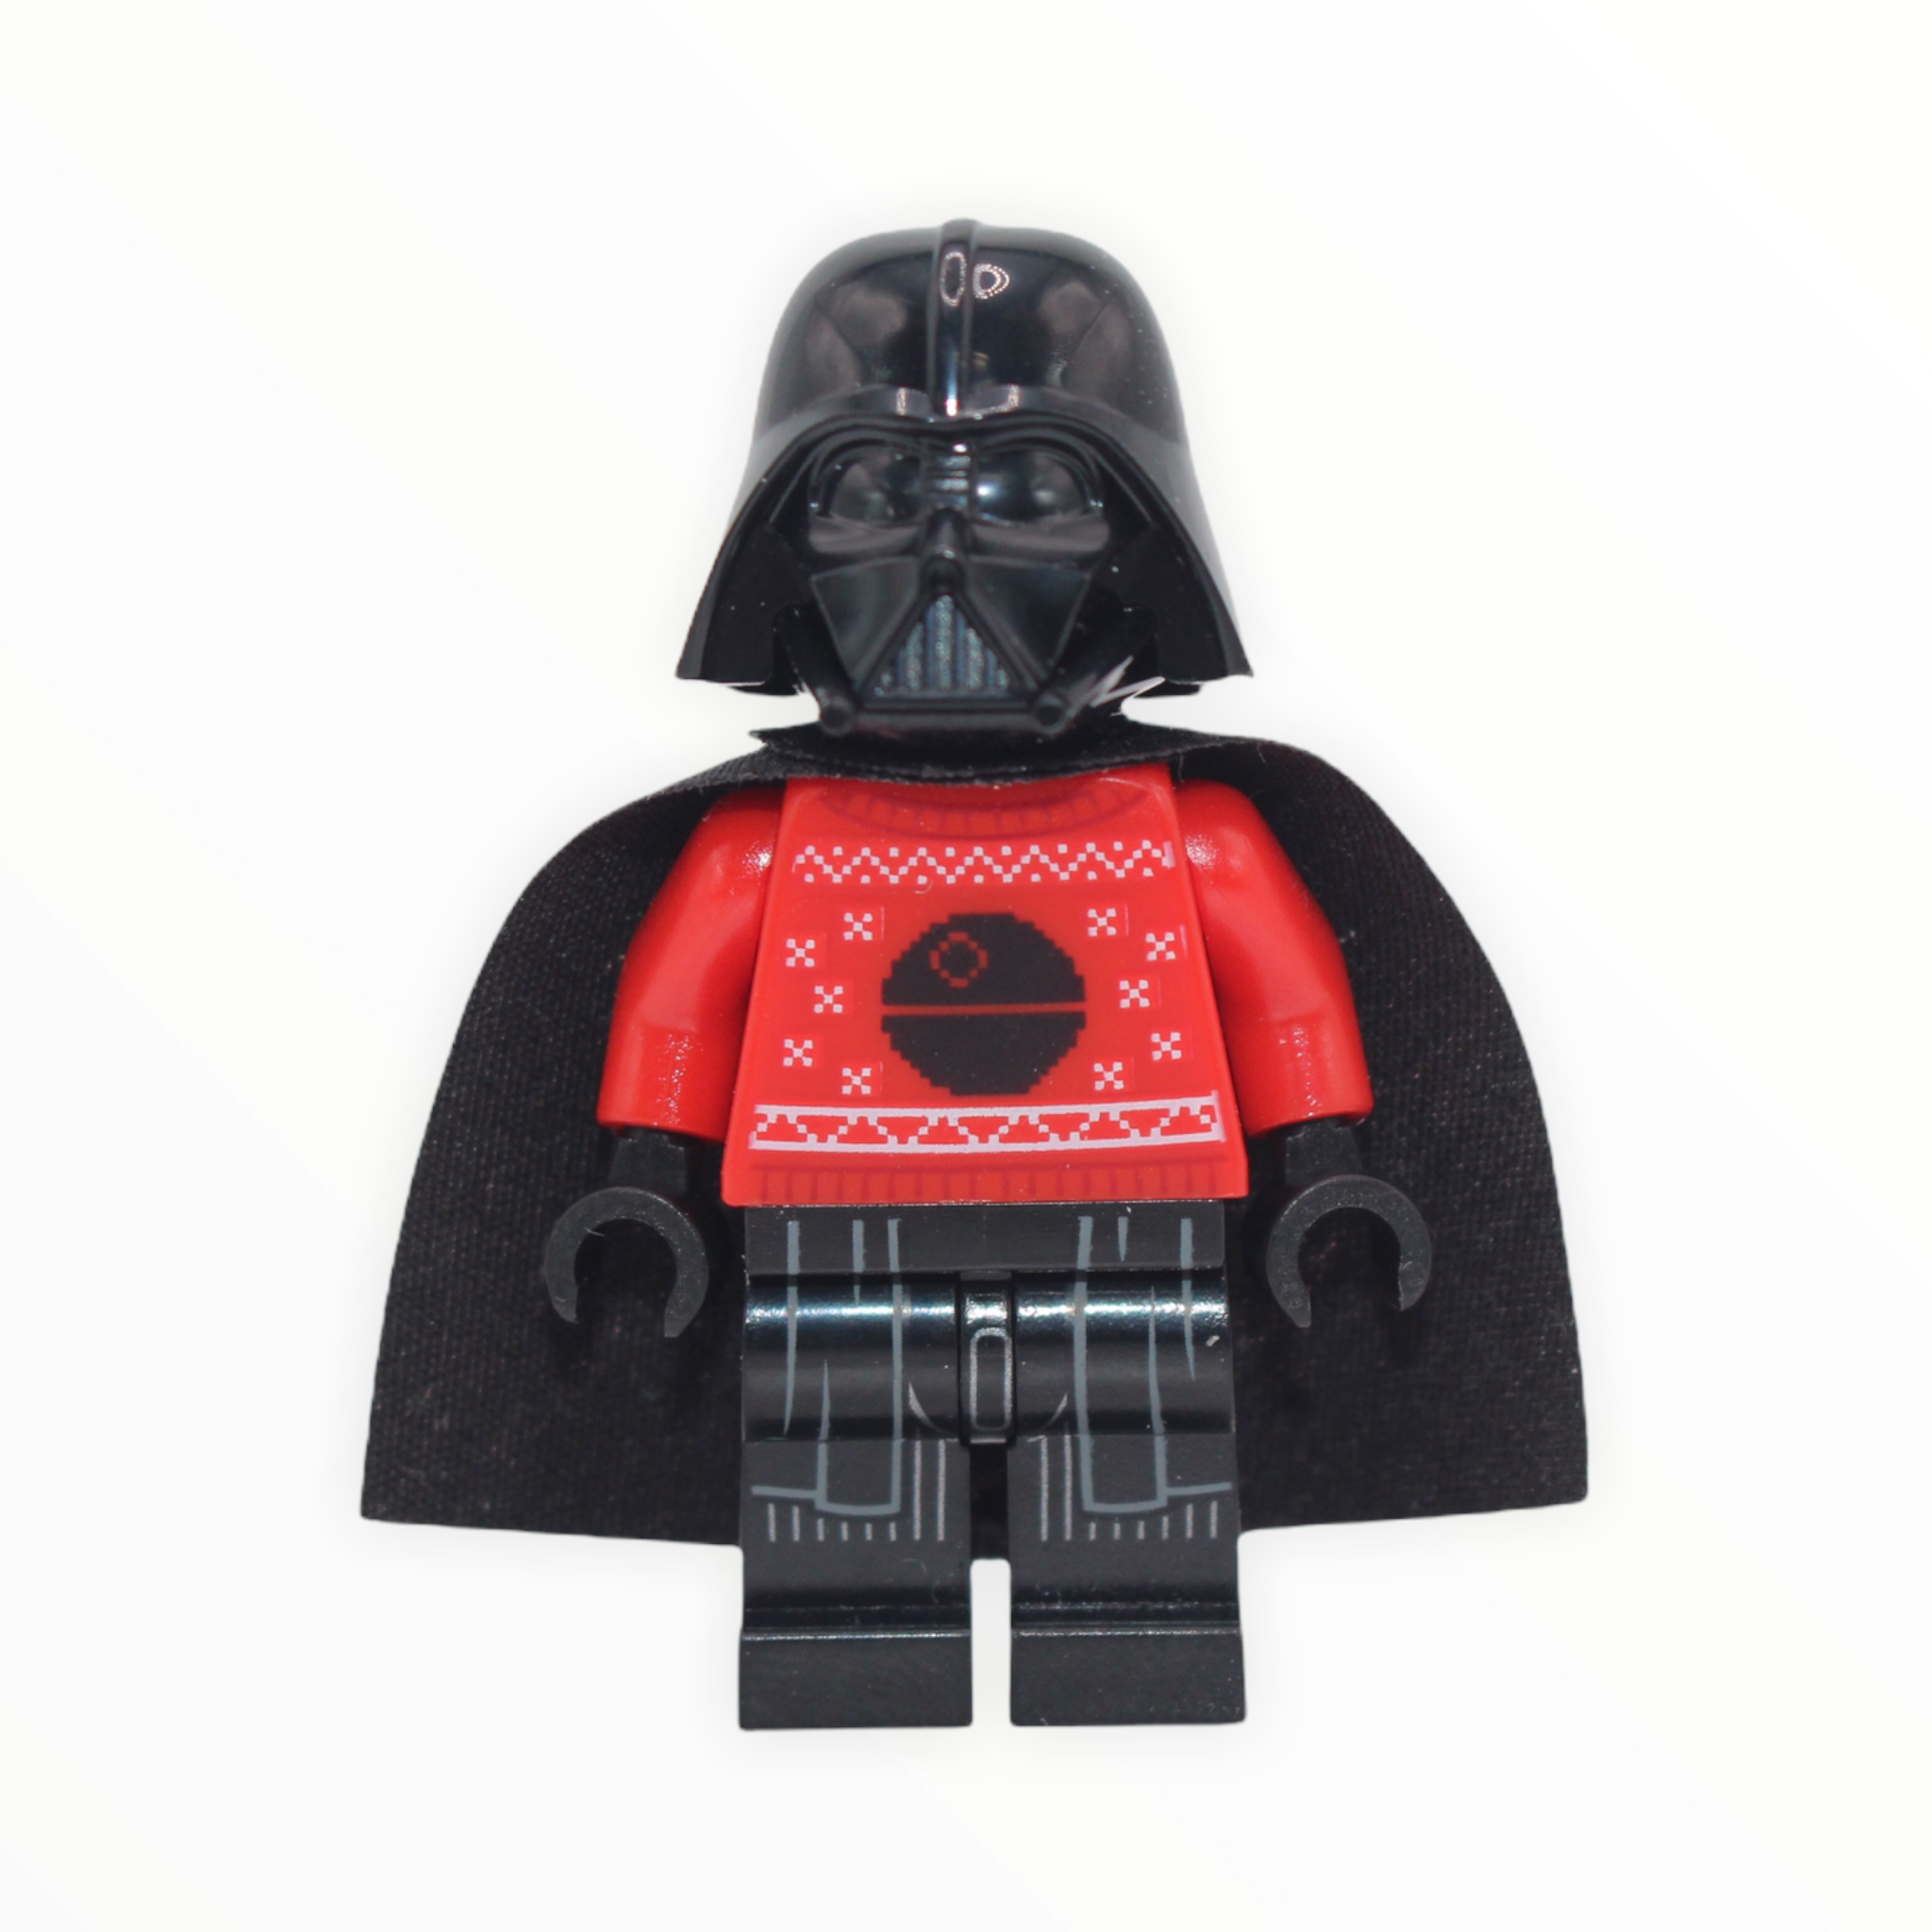 Darth Vader (type 2 helmet, Christmas sweater with Death Star)